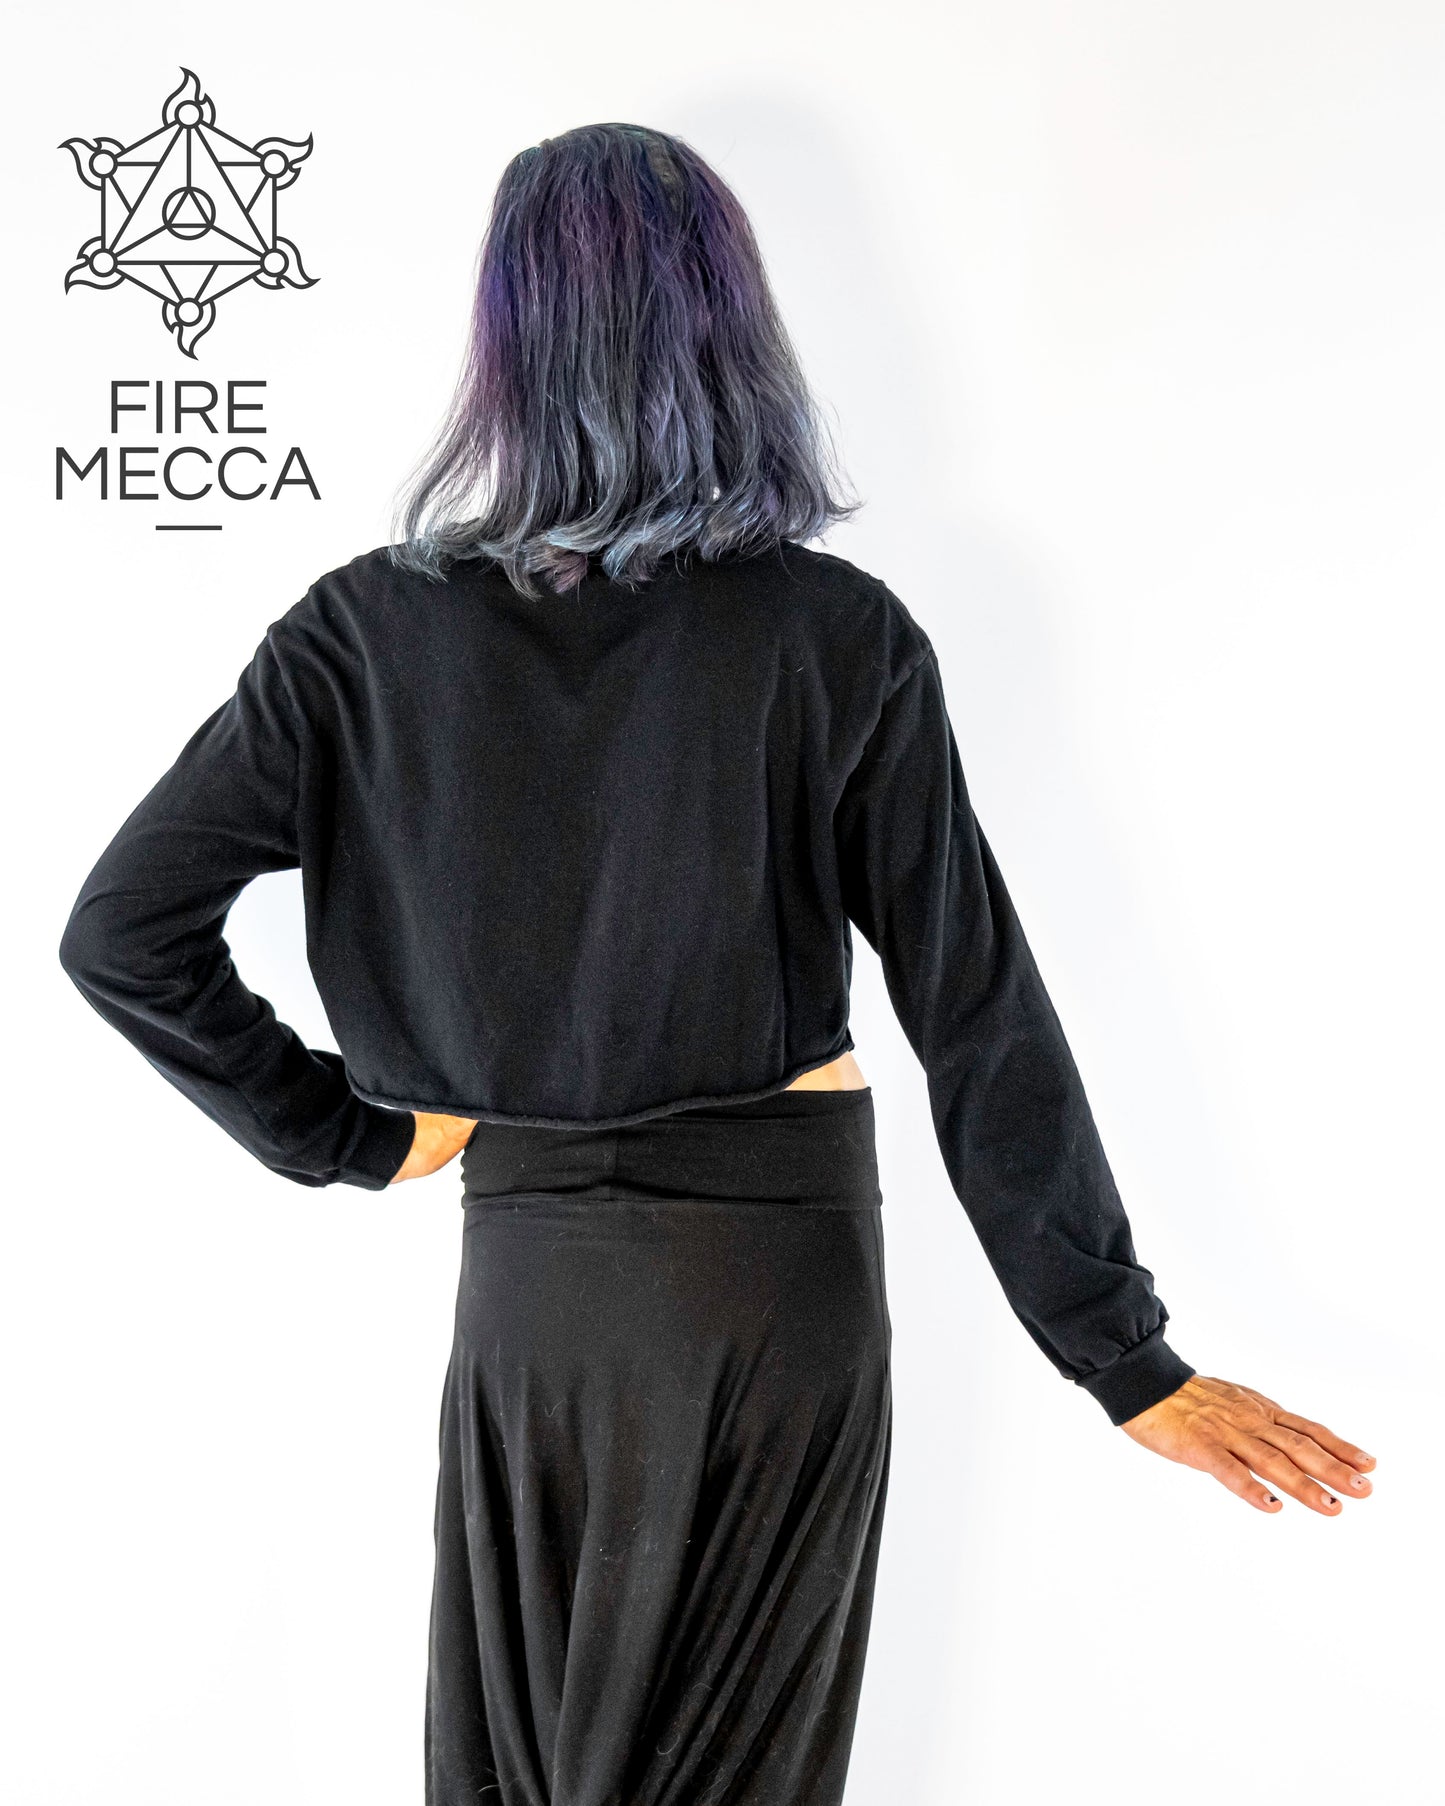 FIRE MECCA Long Sleeve Crop Top – 100% Cotton – Fire Resistant Ink – Performer – Conclave – Flow, Spinning, Circus, Dance –Festivals & Performances - Long Sleeve Crop T-Shirt